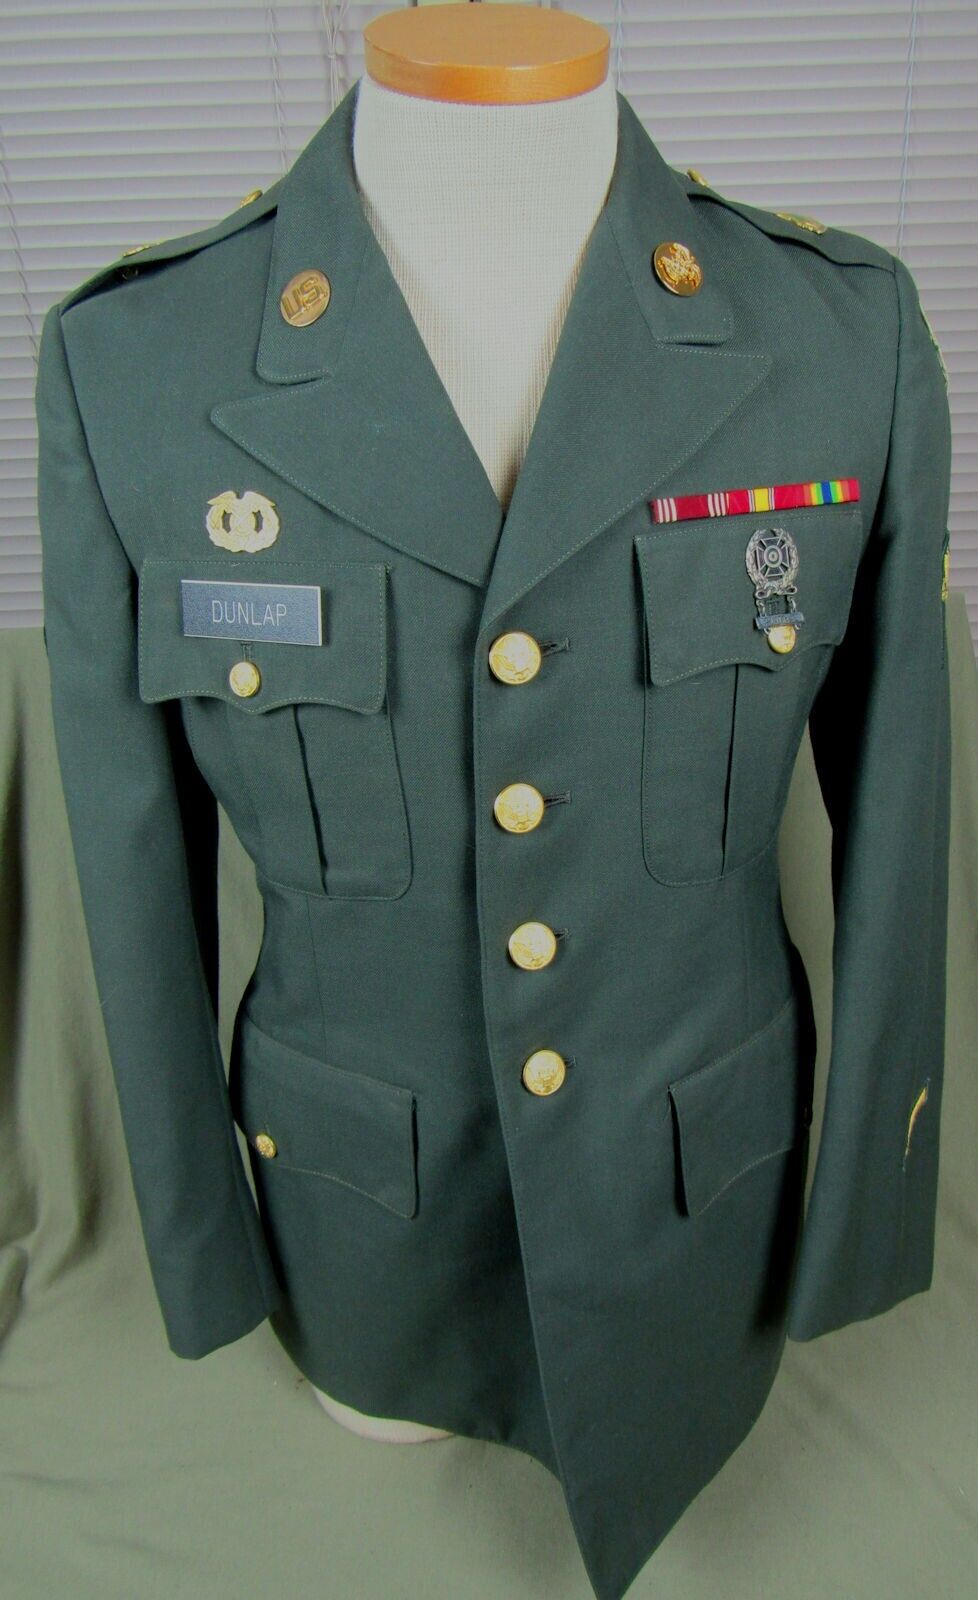 U.S. Army 4th Division Named Spc 36R Poly/Wool Coat 1986 & 30R Trousers 1982